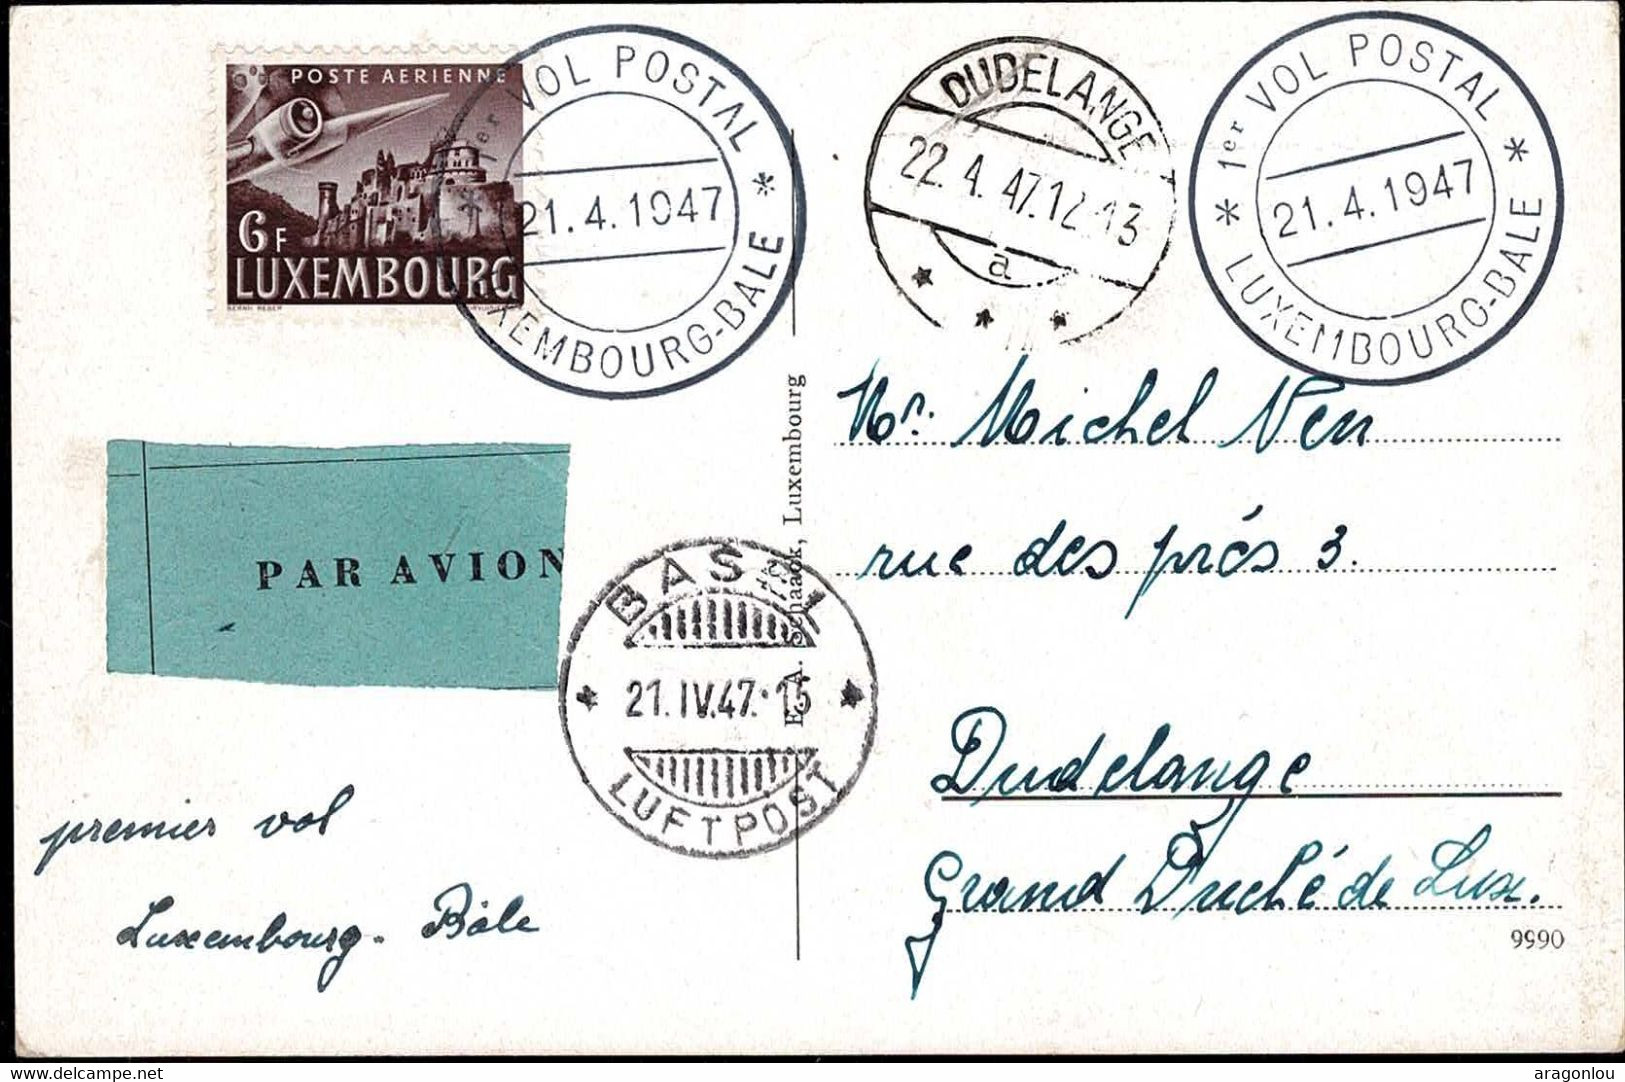 Luxembourg, Luxemburg 1947 Carte 1er Vol Postal Luxembourg-Bâle, 2 Scans - Covers & Documents